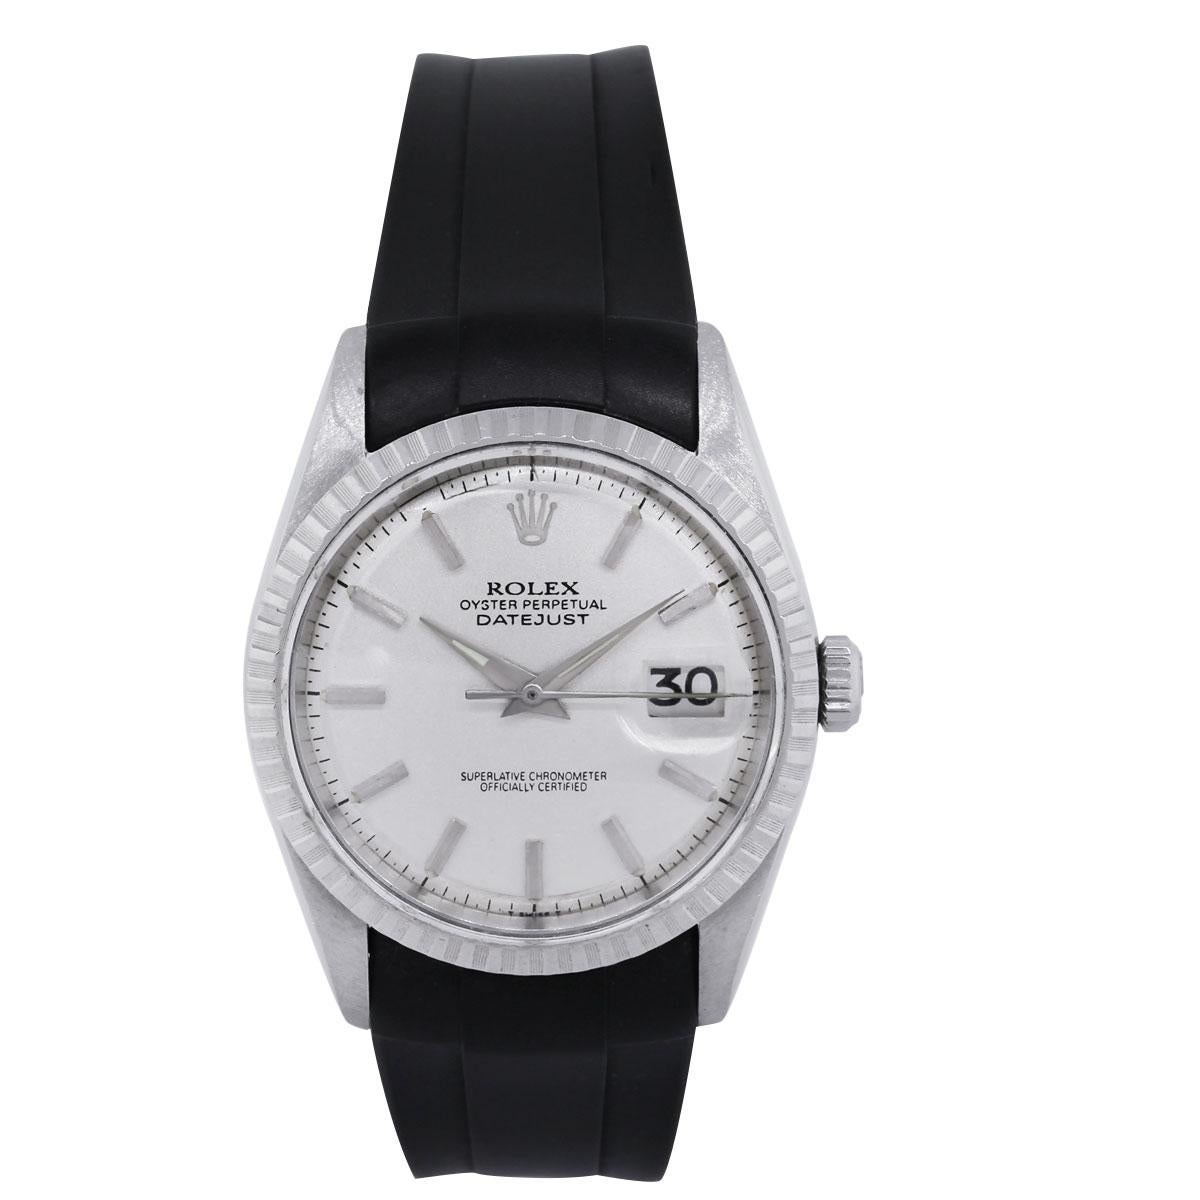 Brand: Rolex
MPN	: 16200
Style: Datejust
Serial: Number	“U”
Case Material: Stainless Steel
Dial: Silver dial with raised hour markers and hands. Date is displayed at 3 o’clock.
Bezel: Stainless steel engine turned bezel.
Case Measurements: